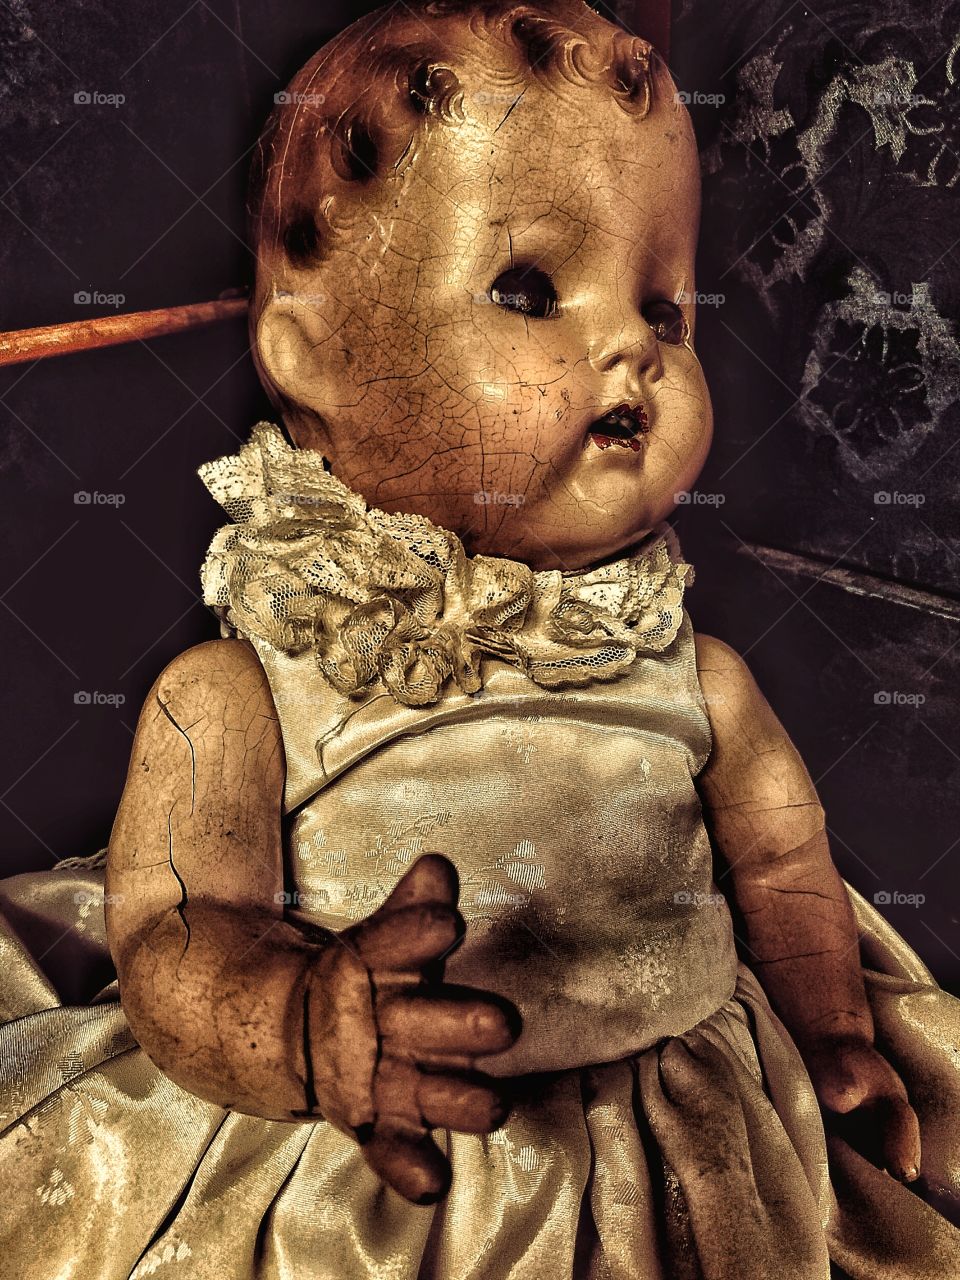 Scary doll from antique store 